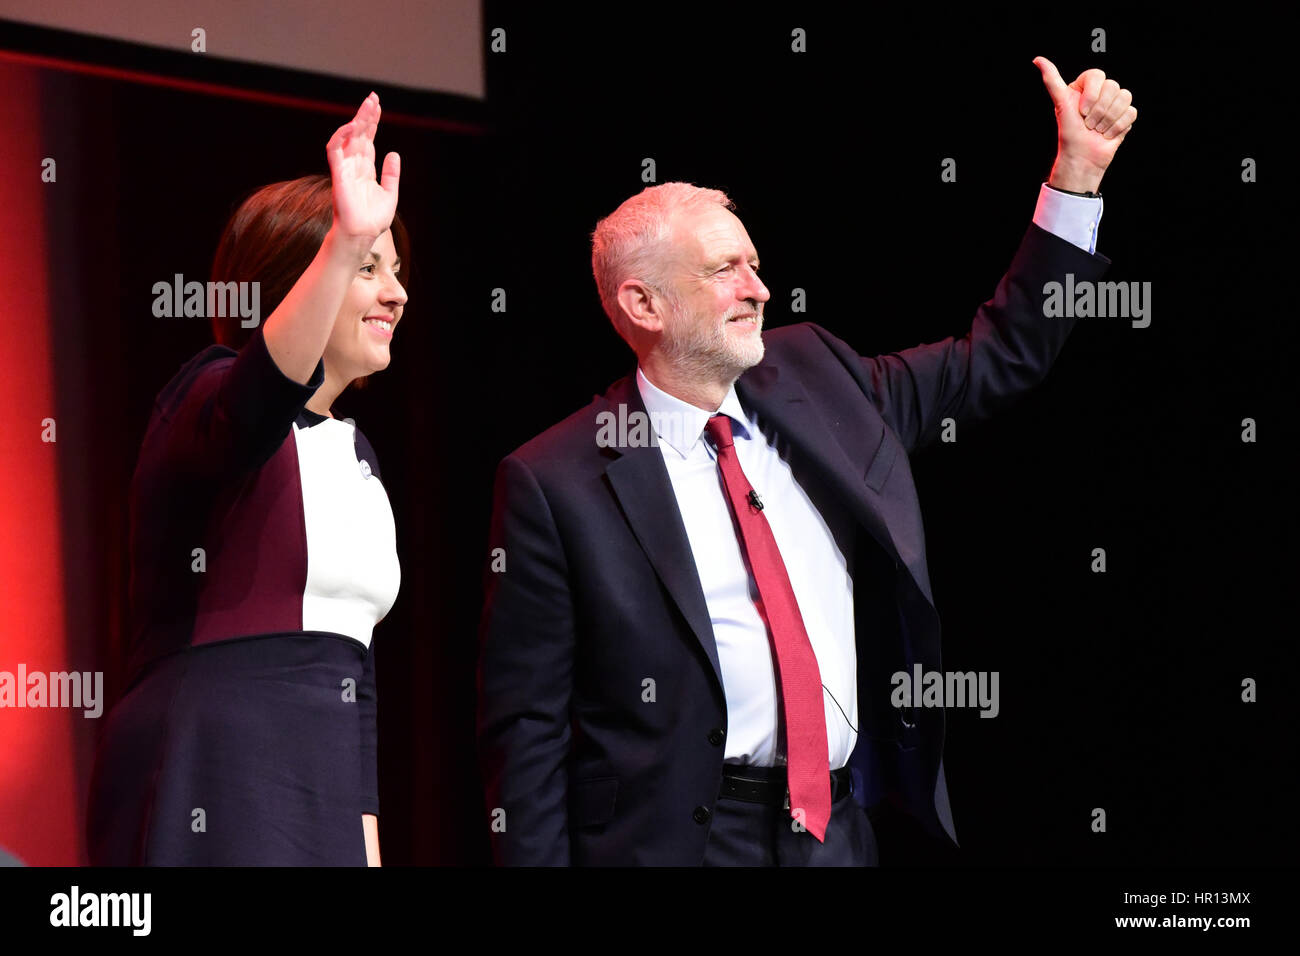 Perth, Scotland, UK. 26th February 2017. Scottish Labour leader Kezia Dugdale on stage with UK Labour leader Jeremy Corbyn after his speech to the Scottish Labour Party conference in Perth, Credit: Ken Jack/Alamy Live News Stock Photo